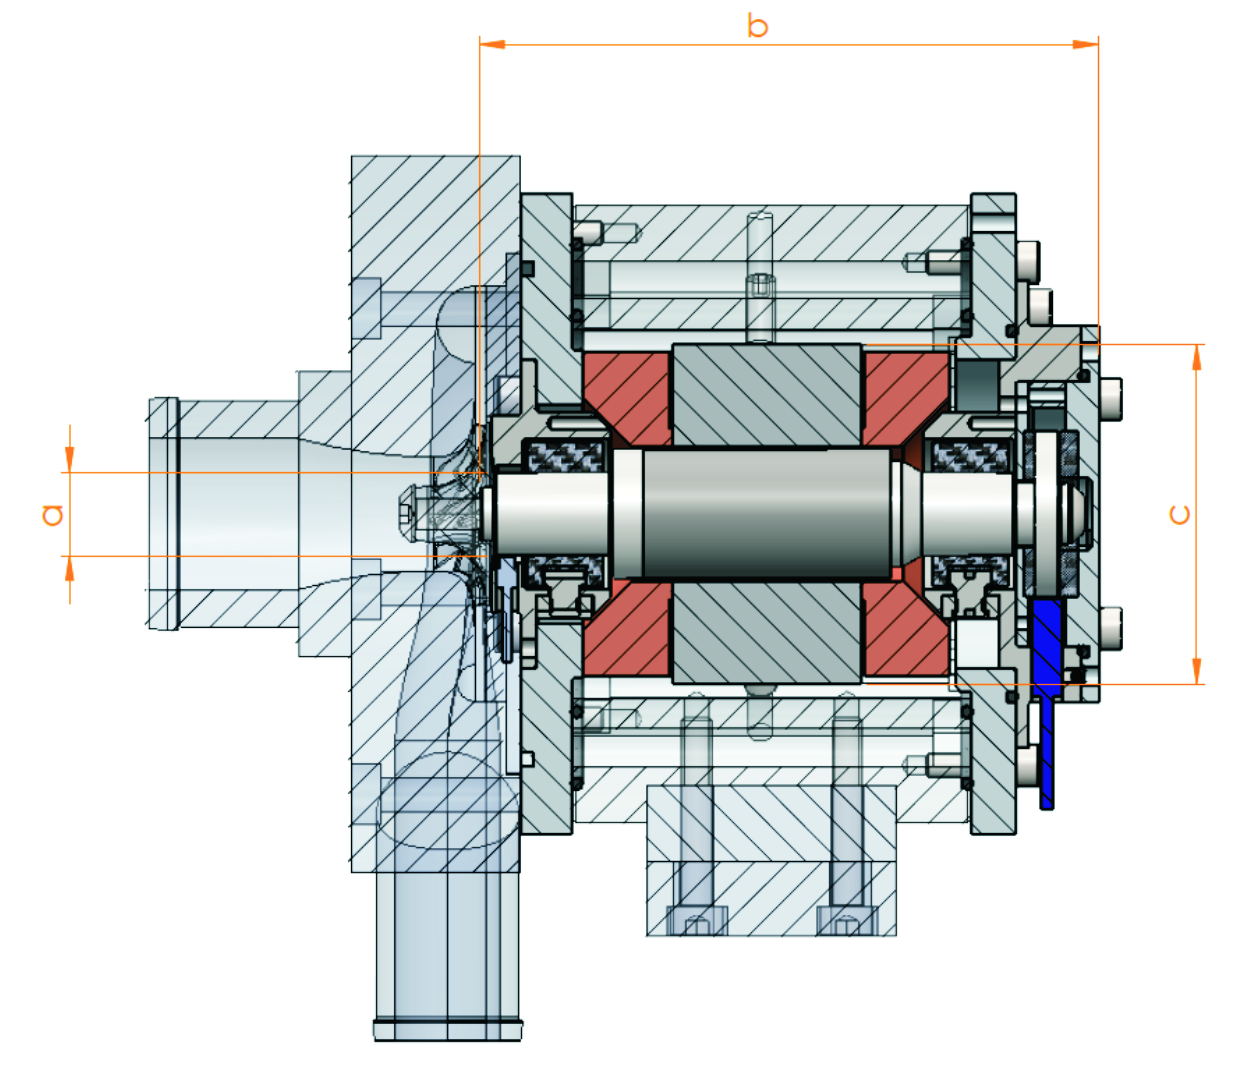 Electrical high-speed synchronous motor drive